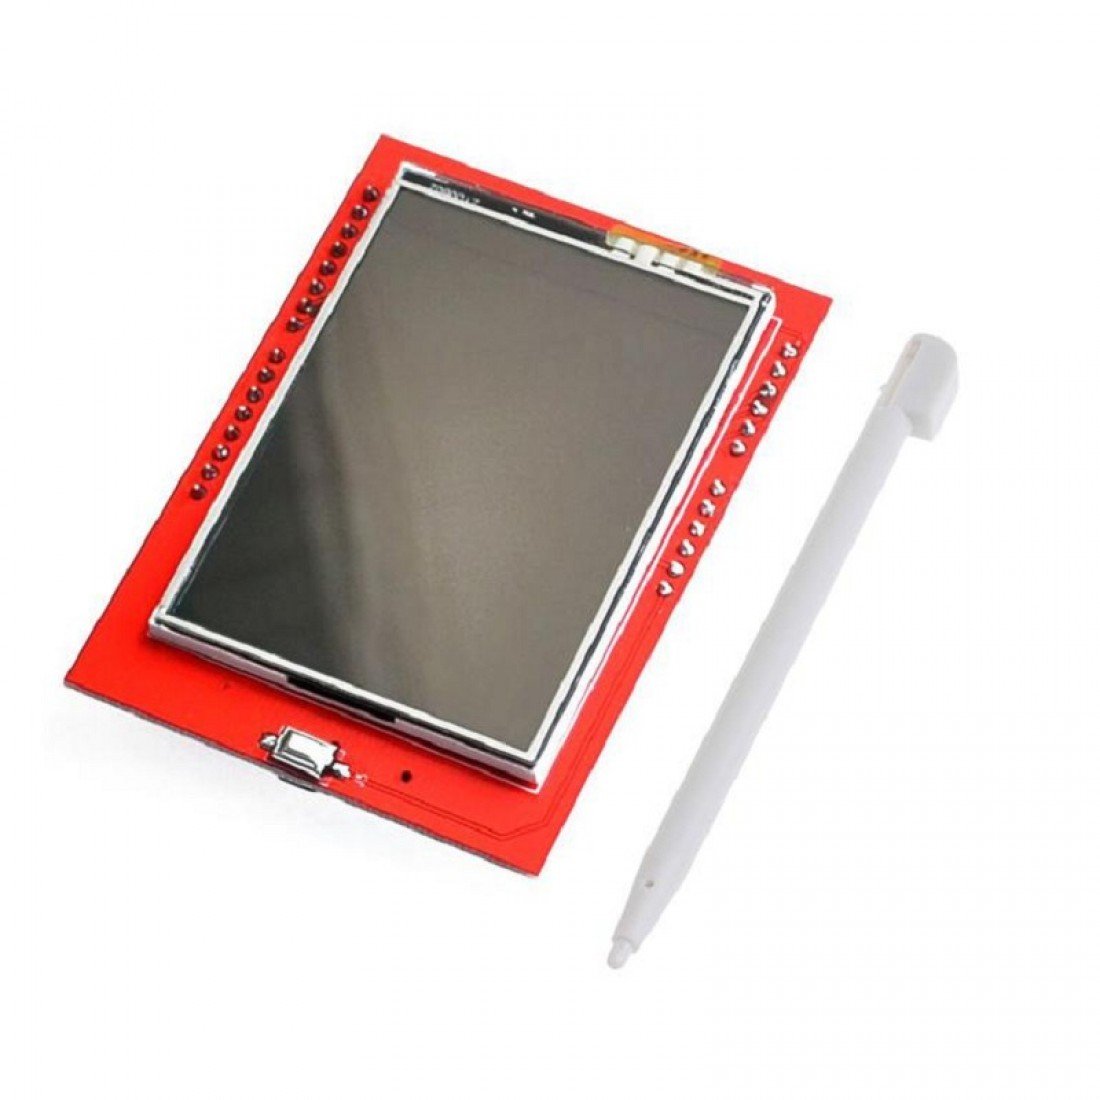 2-4-inch-tft-lcd-touch-screen-lcd-display-module-for-arduino-tech3120-2970-1100×1100